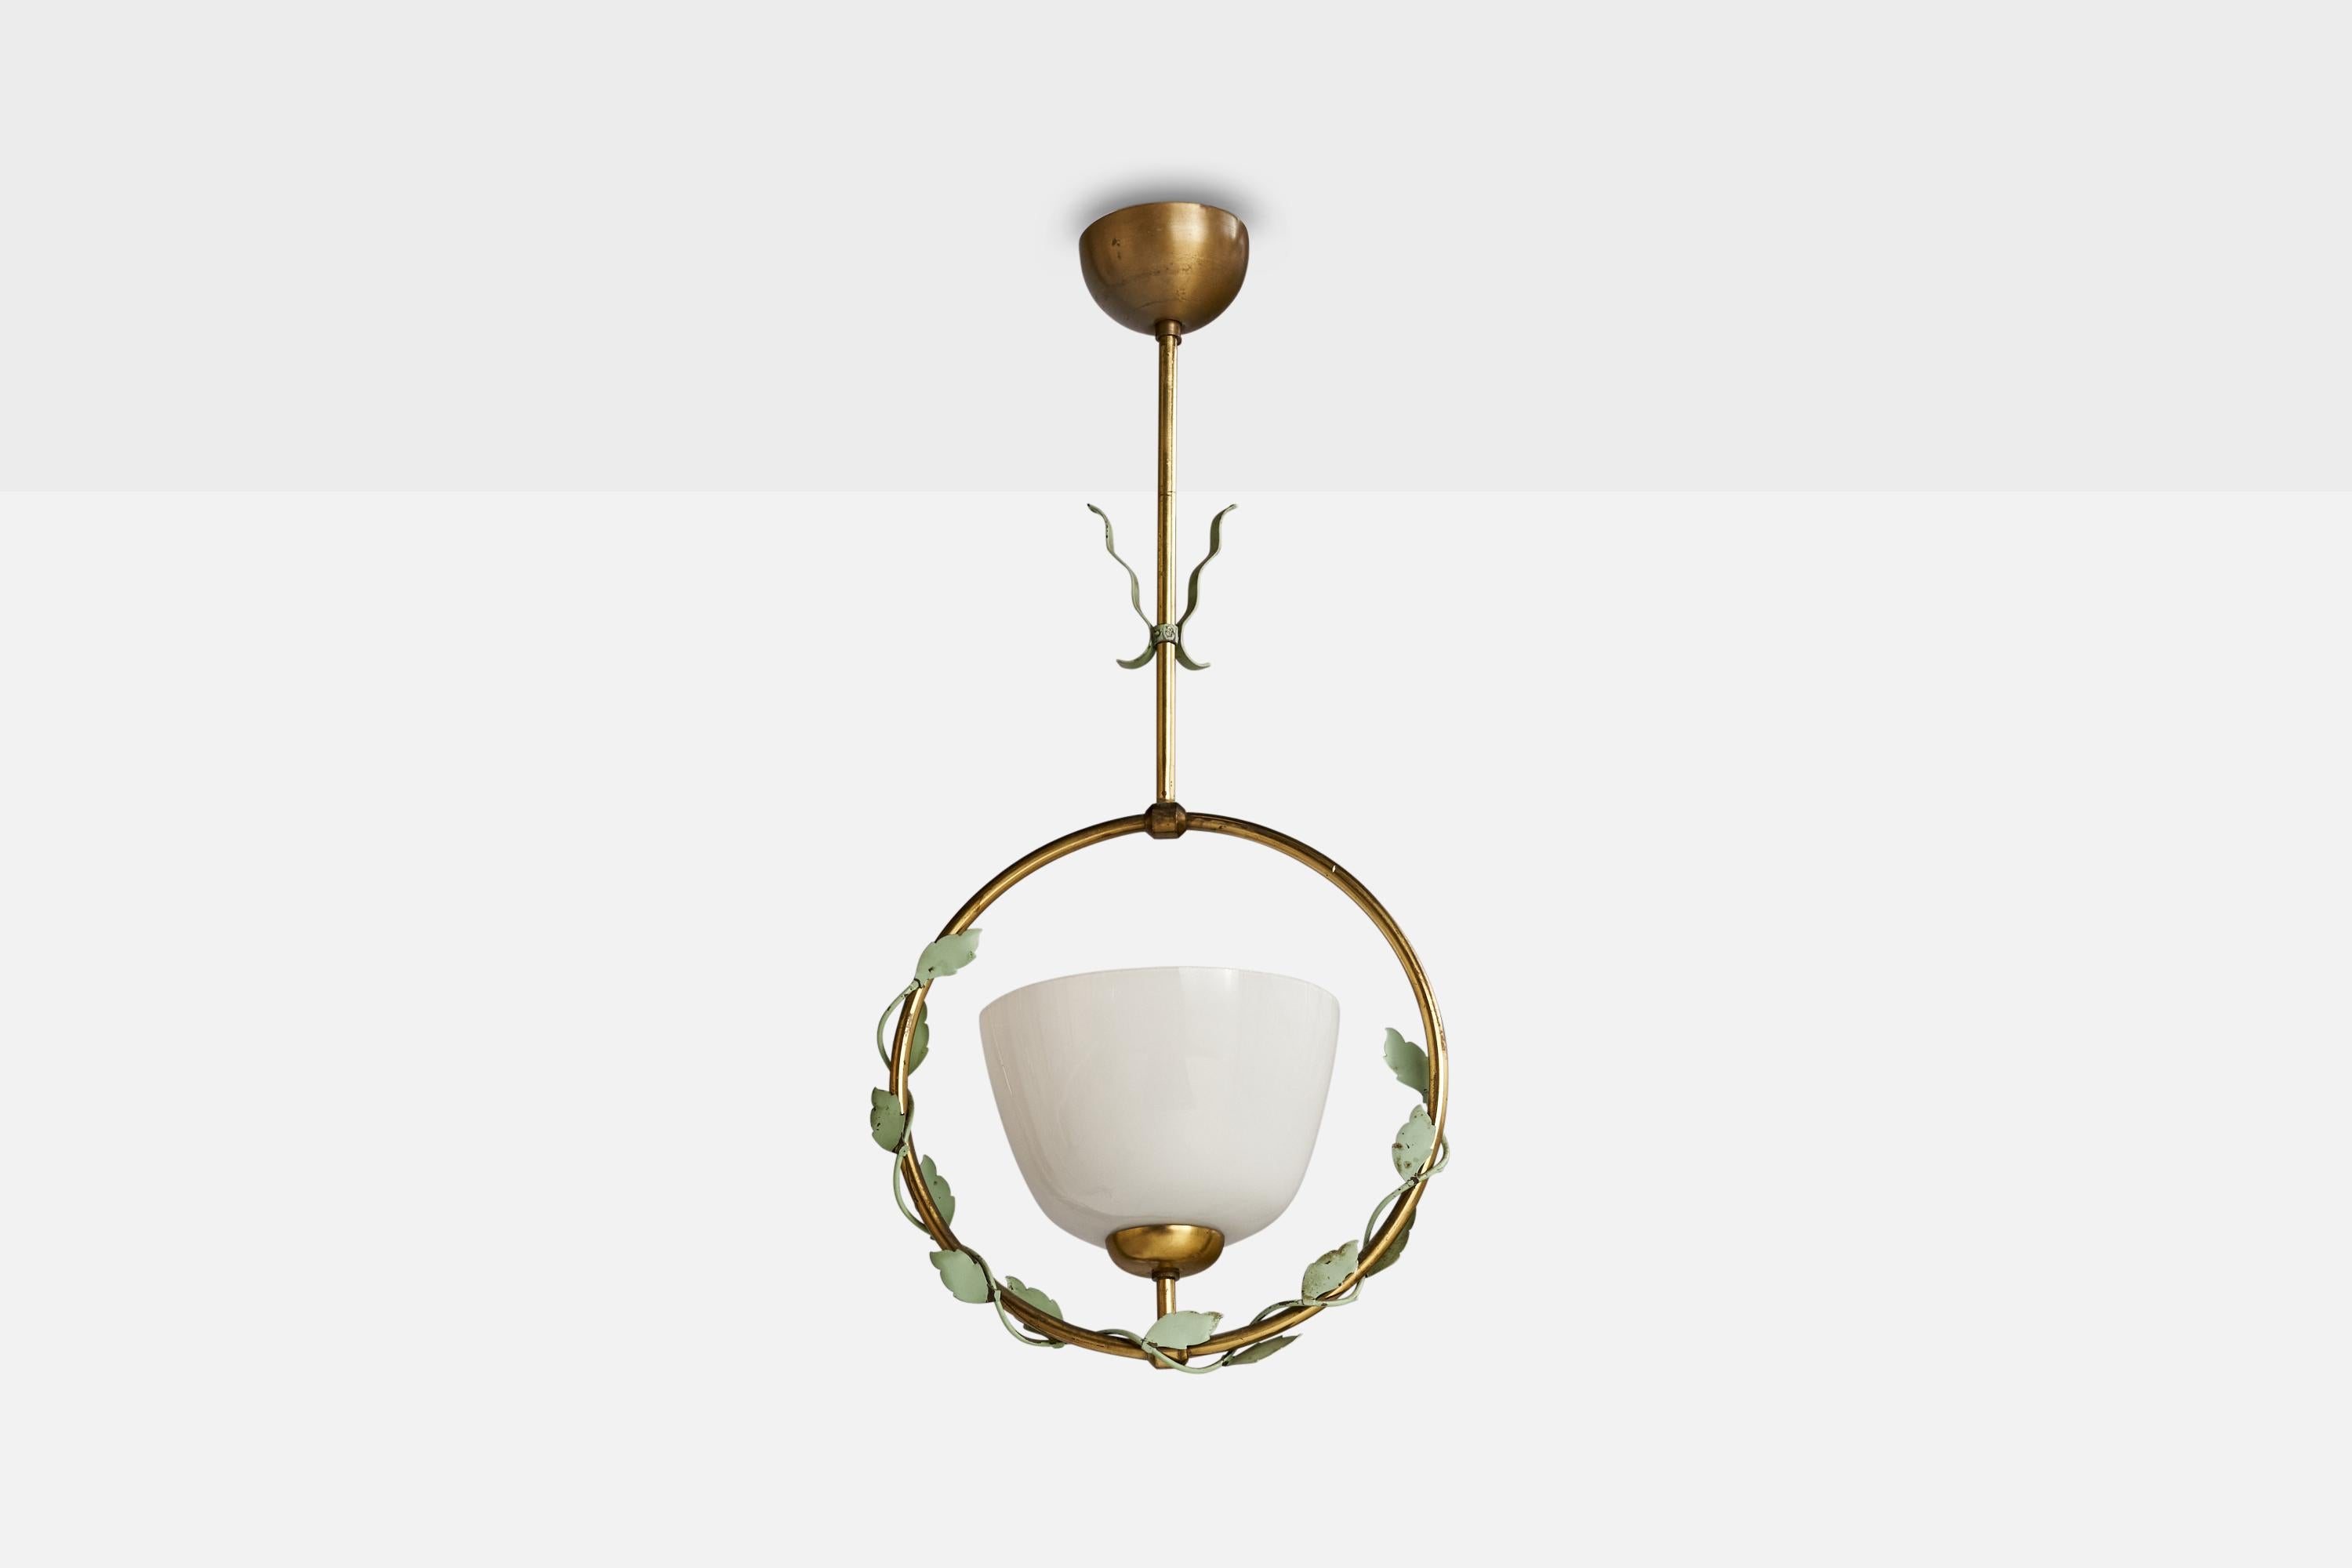 A brass, green-painted metal and opaline glass pendant designed and produced in Sweden, c. 1940s.

Dimensions of canopy (inches): 2” H x 3.5”  Diameter
Socket takes standard E-26 bulbs. 1 socket.There is no maximum wattage stated on the fixture. All